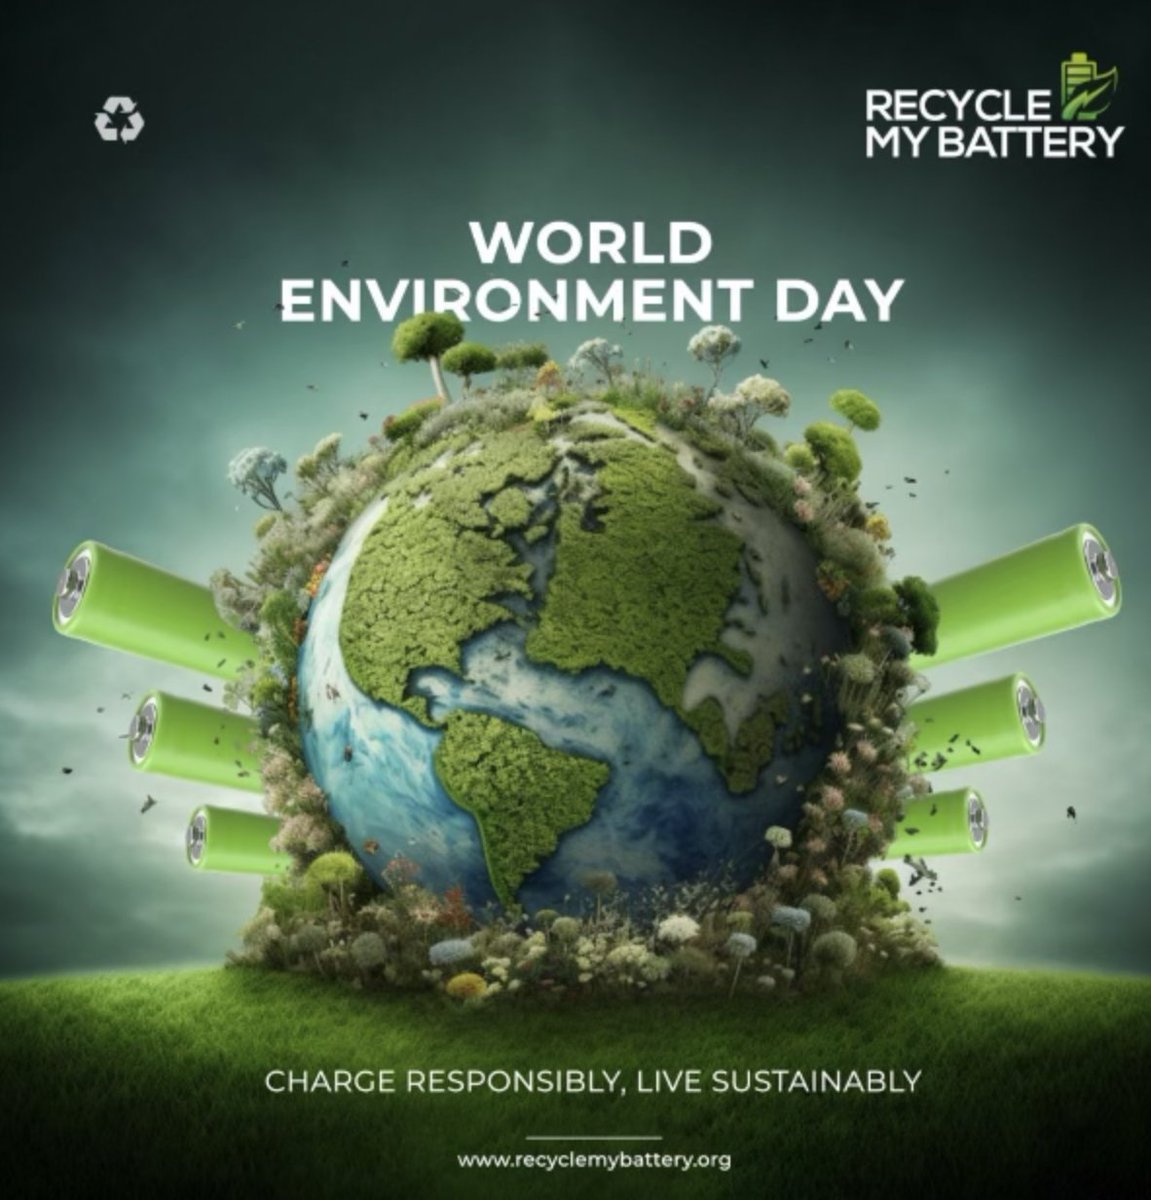 Celebrate World Environment Day! Protect our planet: embrace renewables, reduce carbon footprint, conserve water, recycle, minimize waste. Preserve biodiversity, plant trees, support conservation. Educate, inspire responsibility. Every action counts. For a sustainable future!